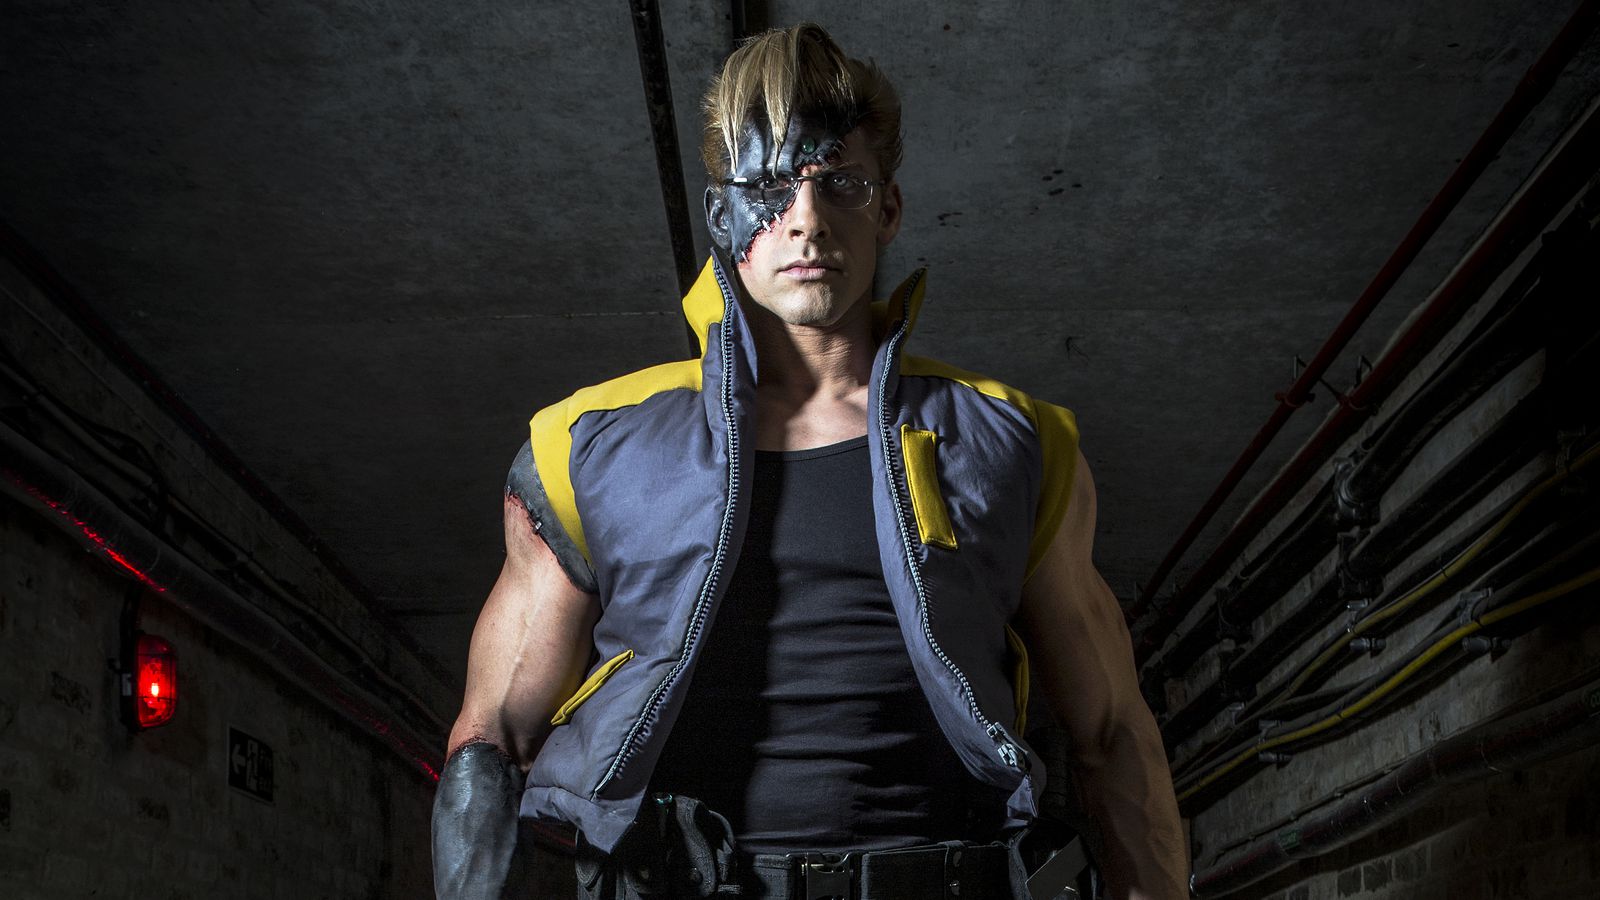 INTERVIEW: STREET FIGHTER RESURRECTION's Alain Moussi On Charlie Nash & More